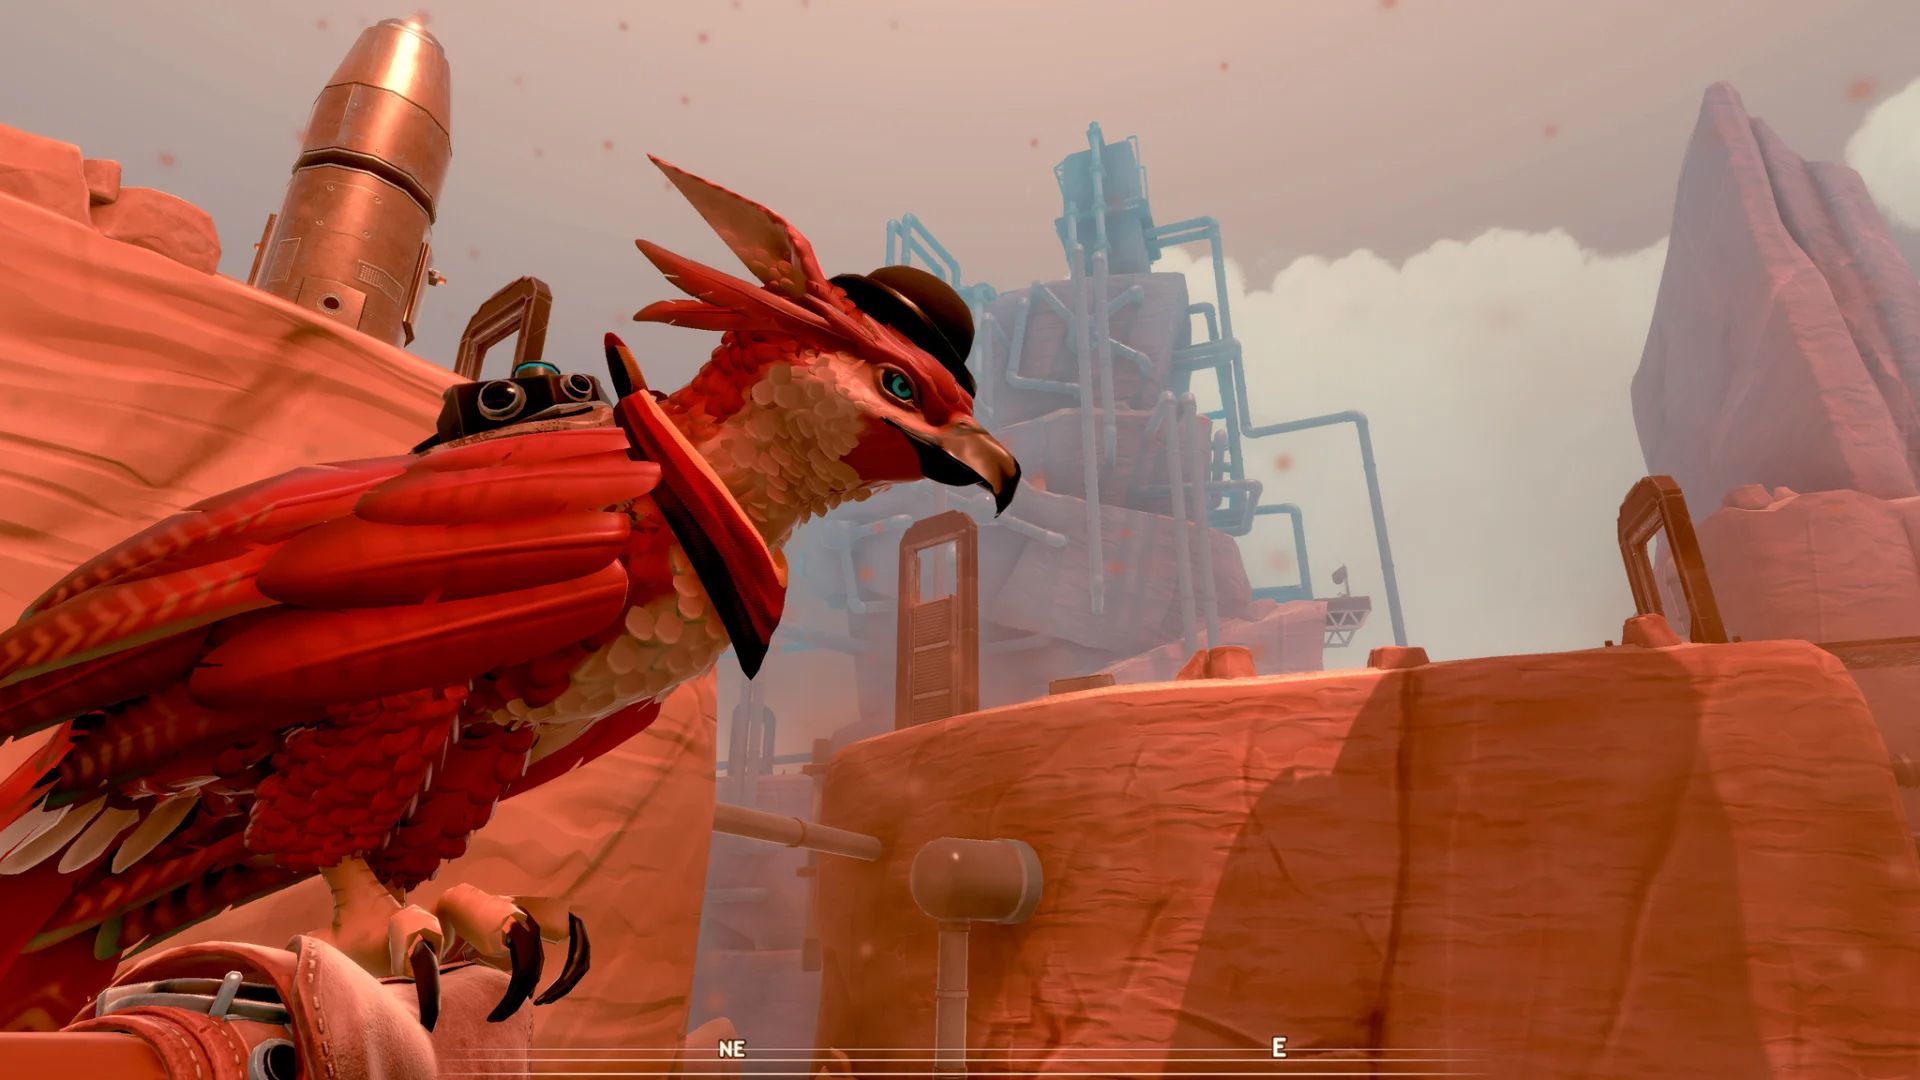 A screenshot of the VR game Falcon Age.